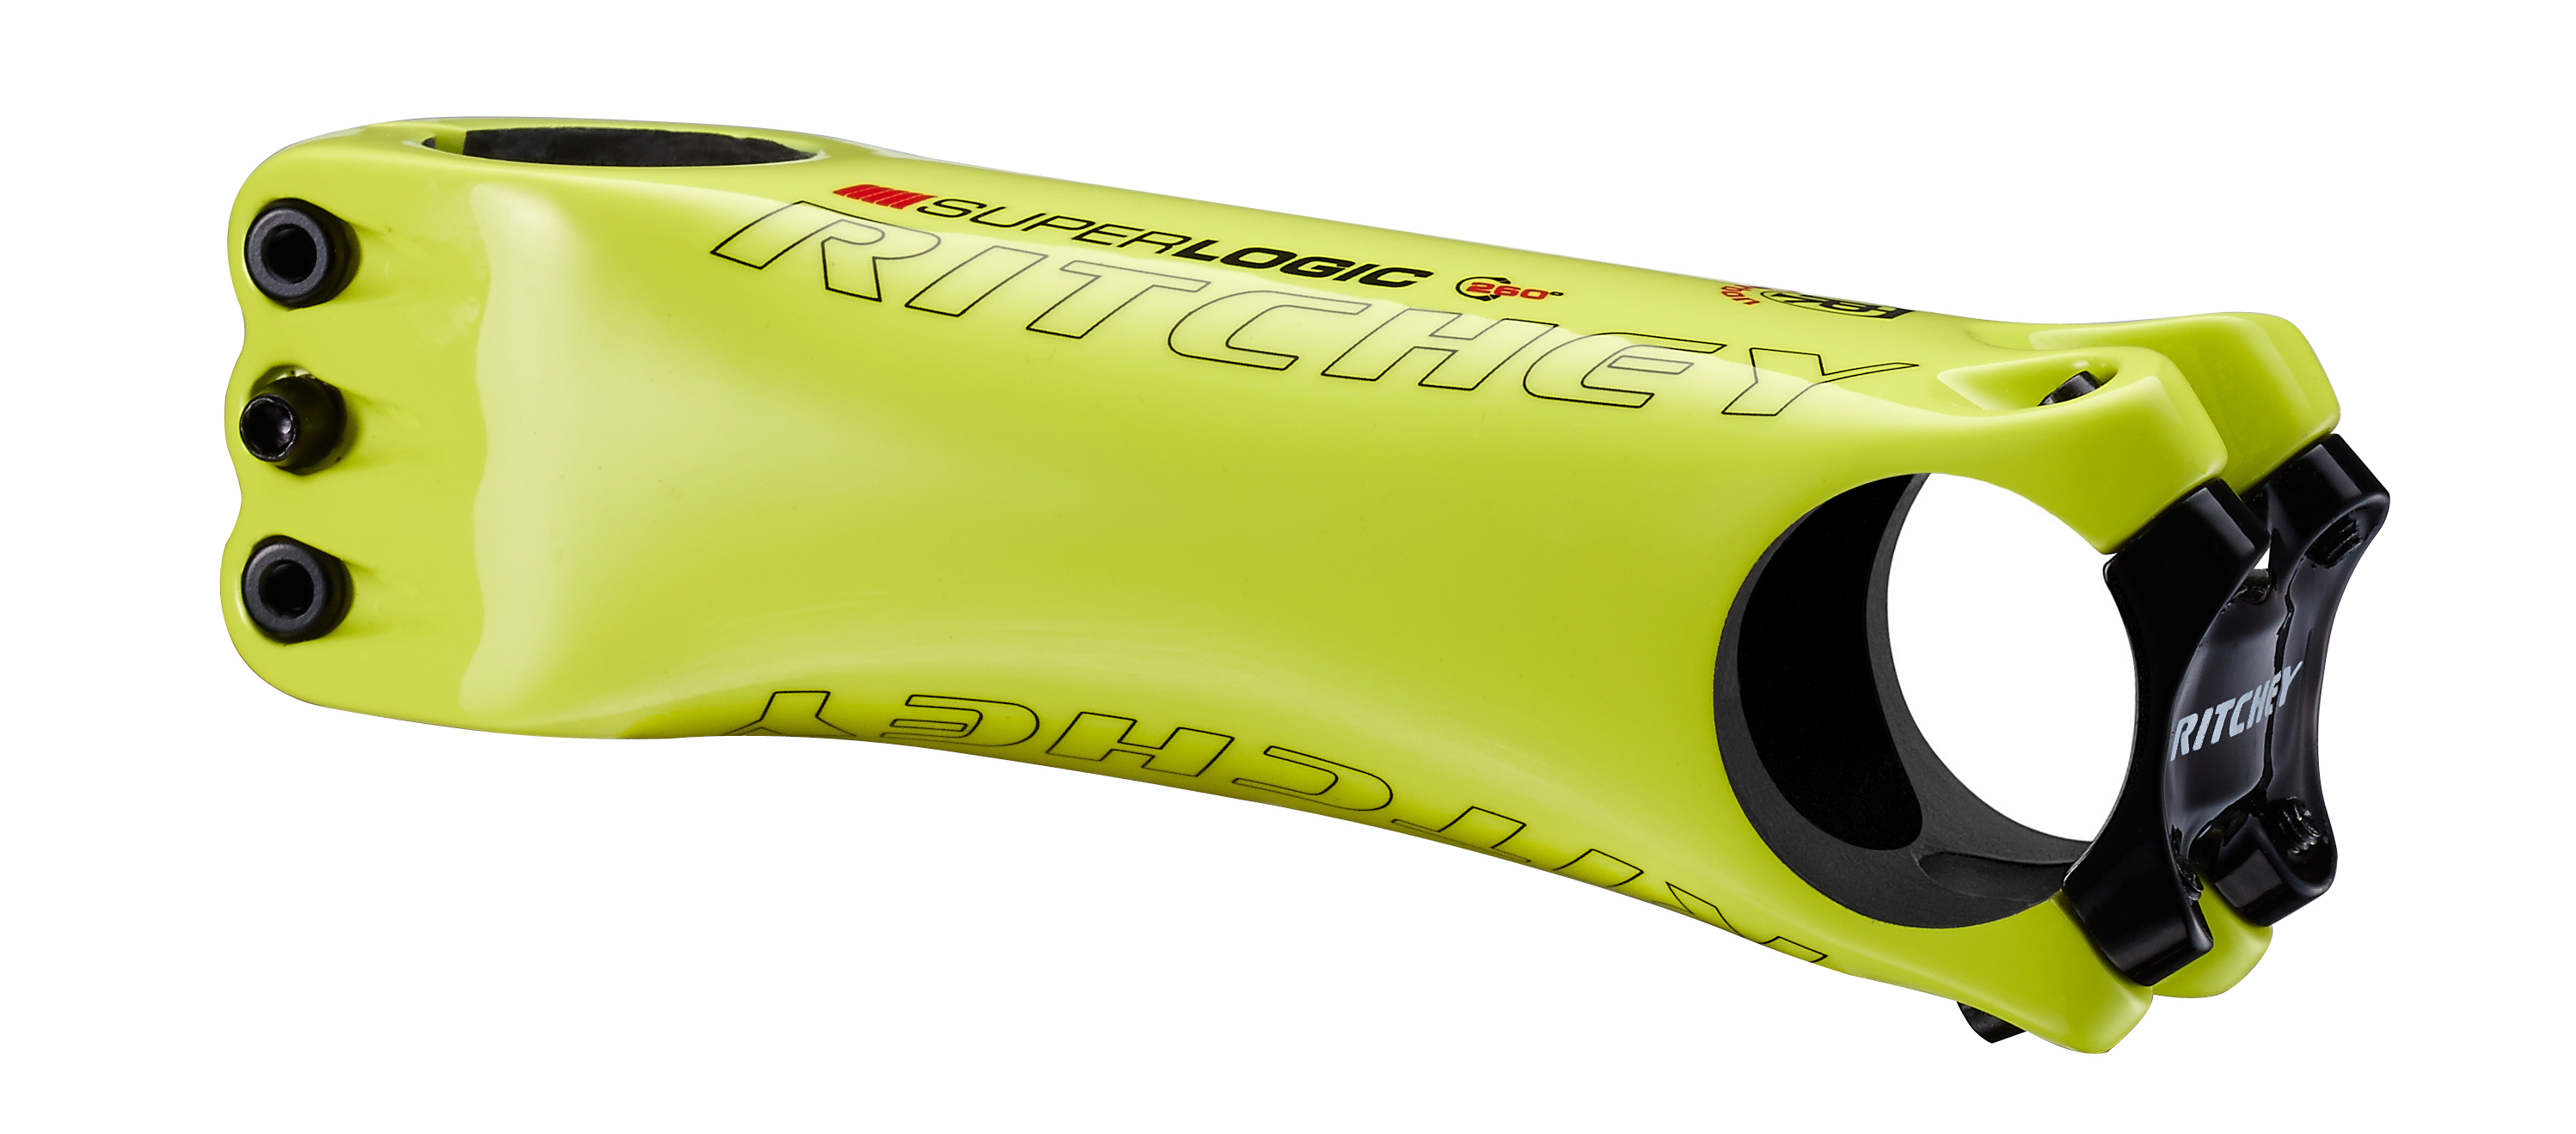 Ritchey Introduces Limited Edition SuperLogic C260 High-Vis Yellow